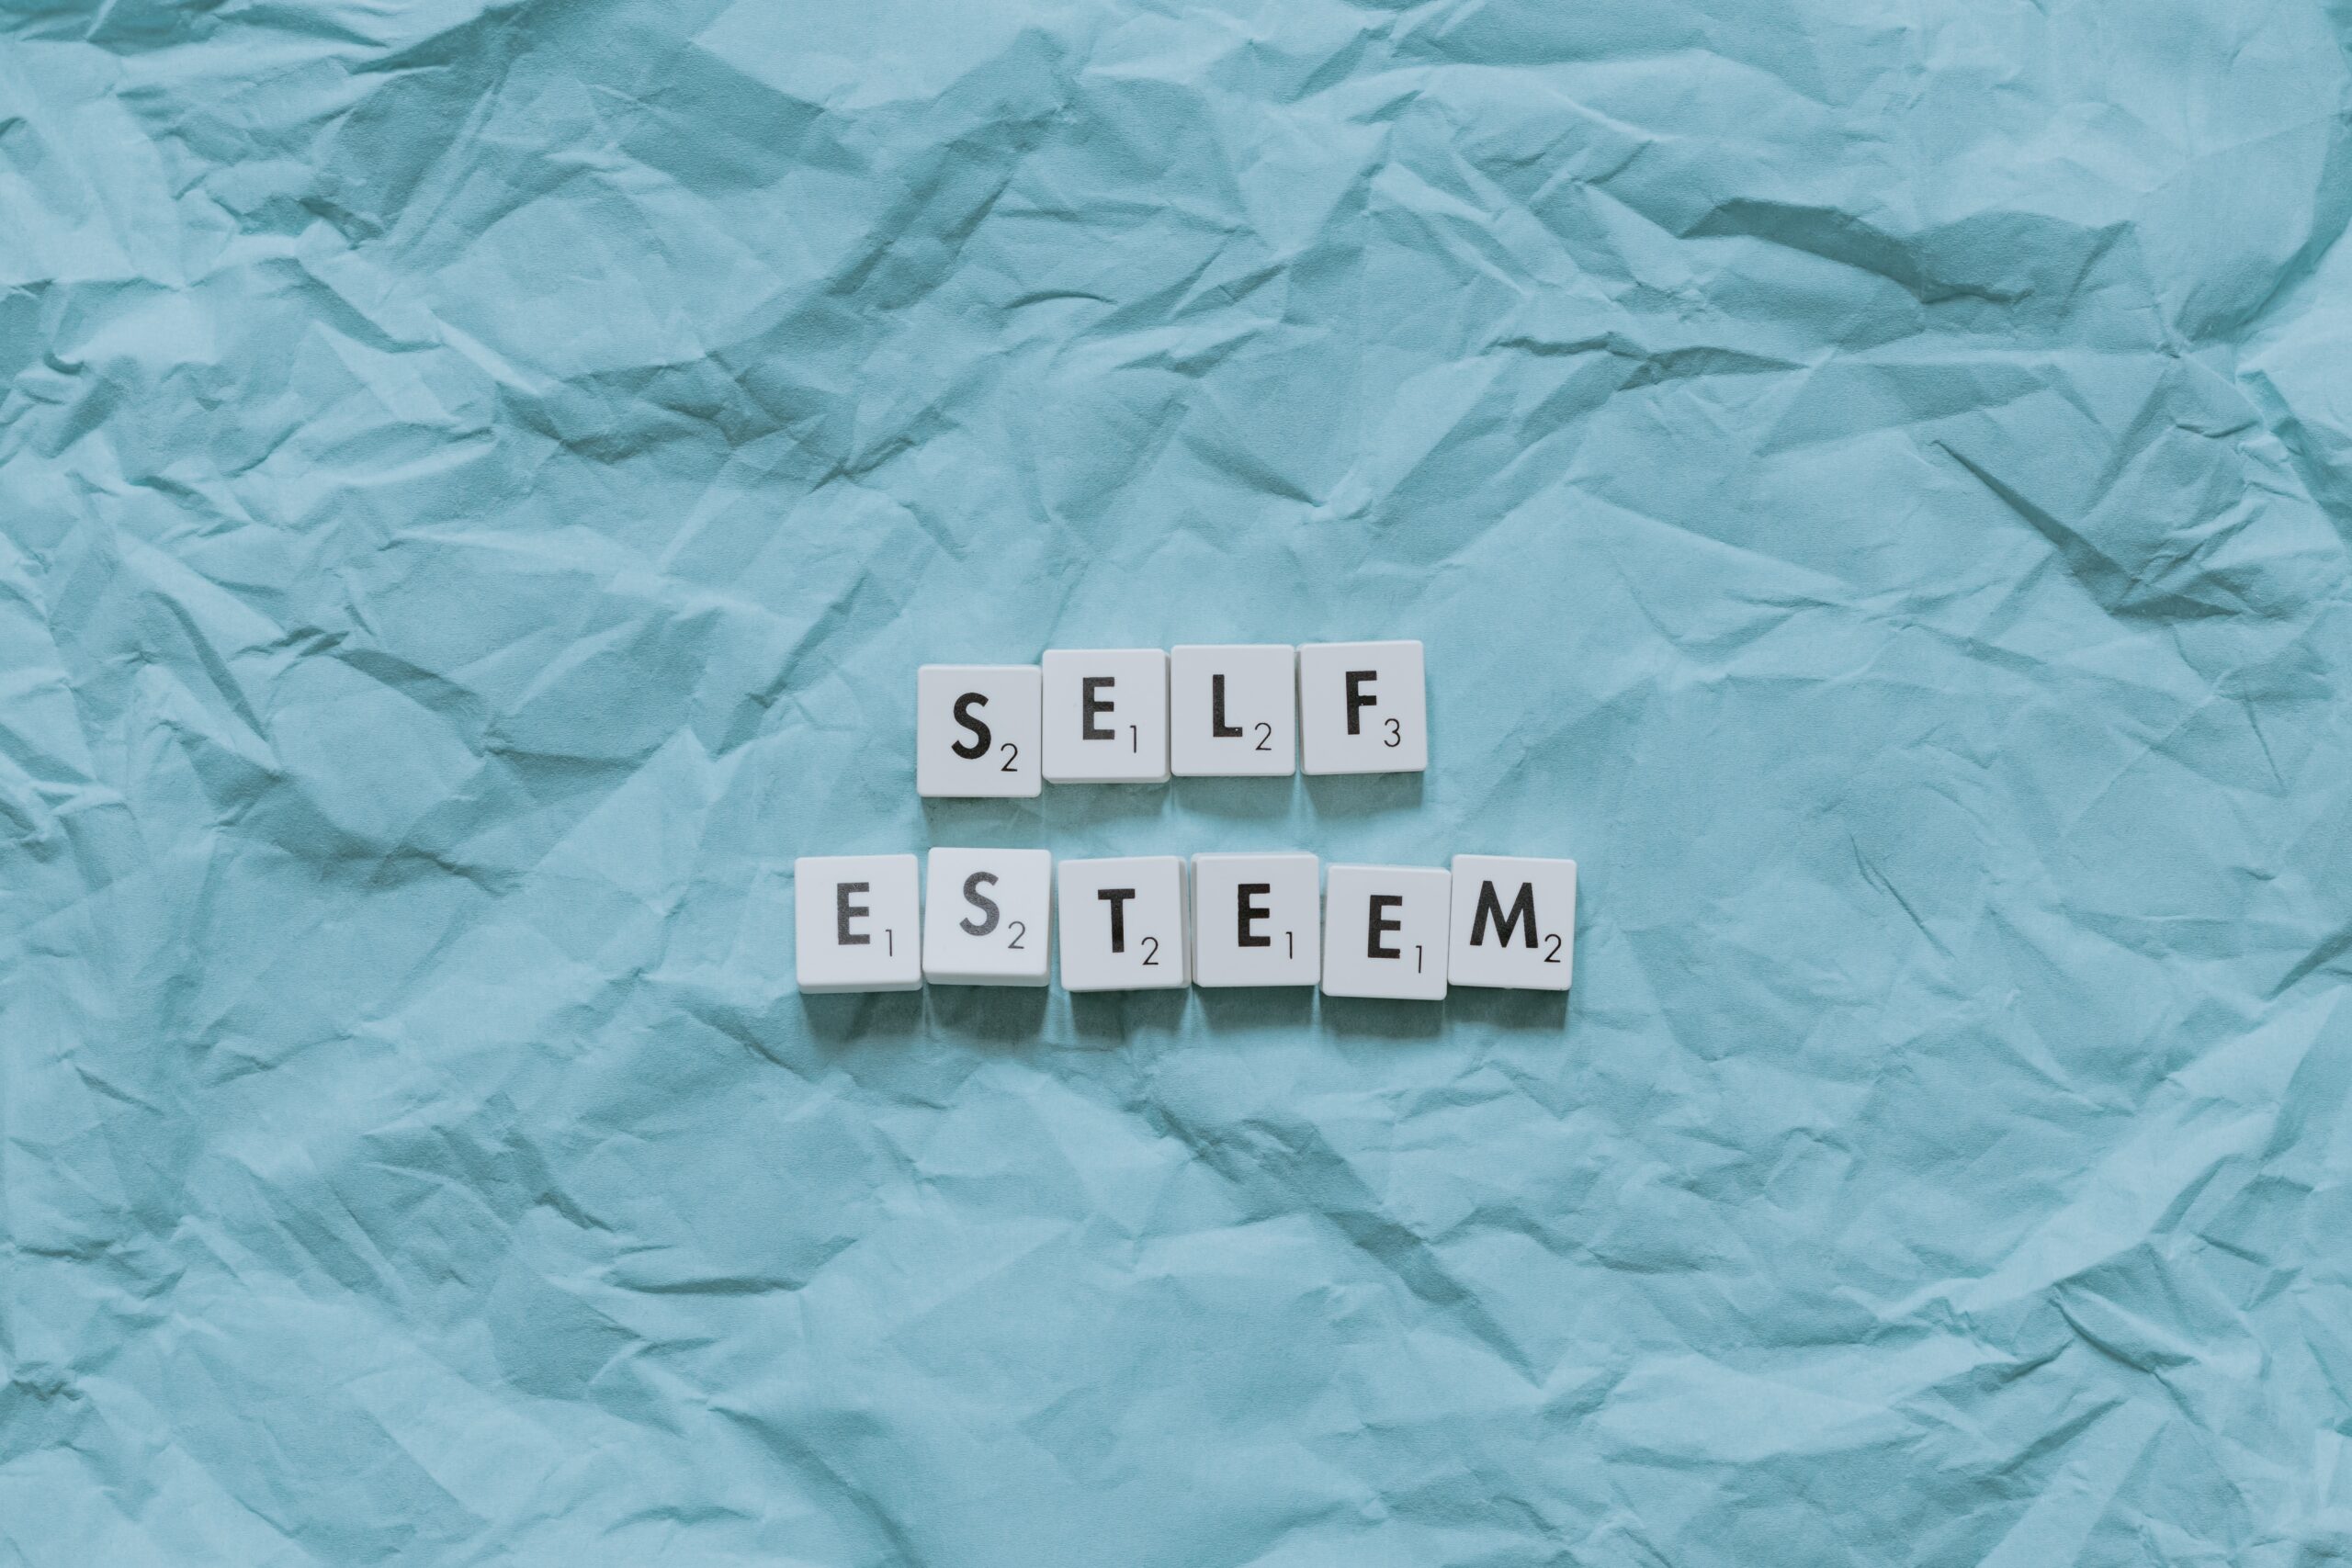 Low Self-Esteem: How to Heal and Change